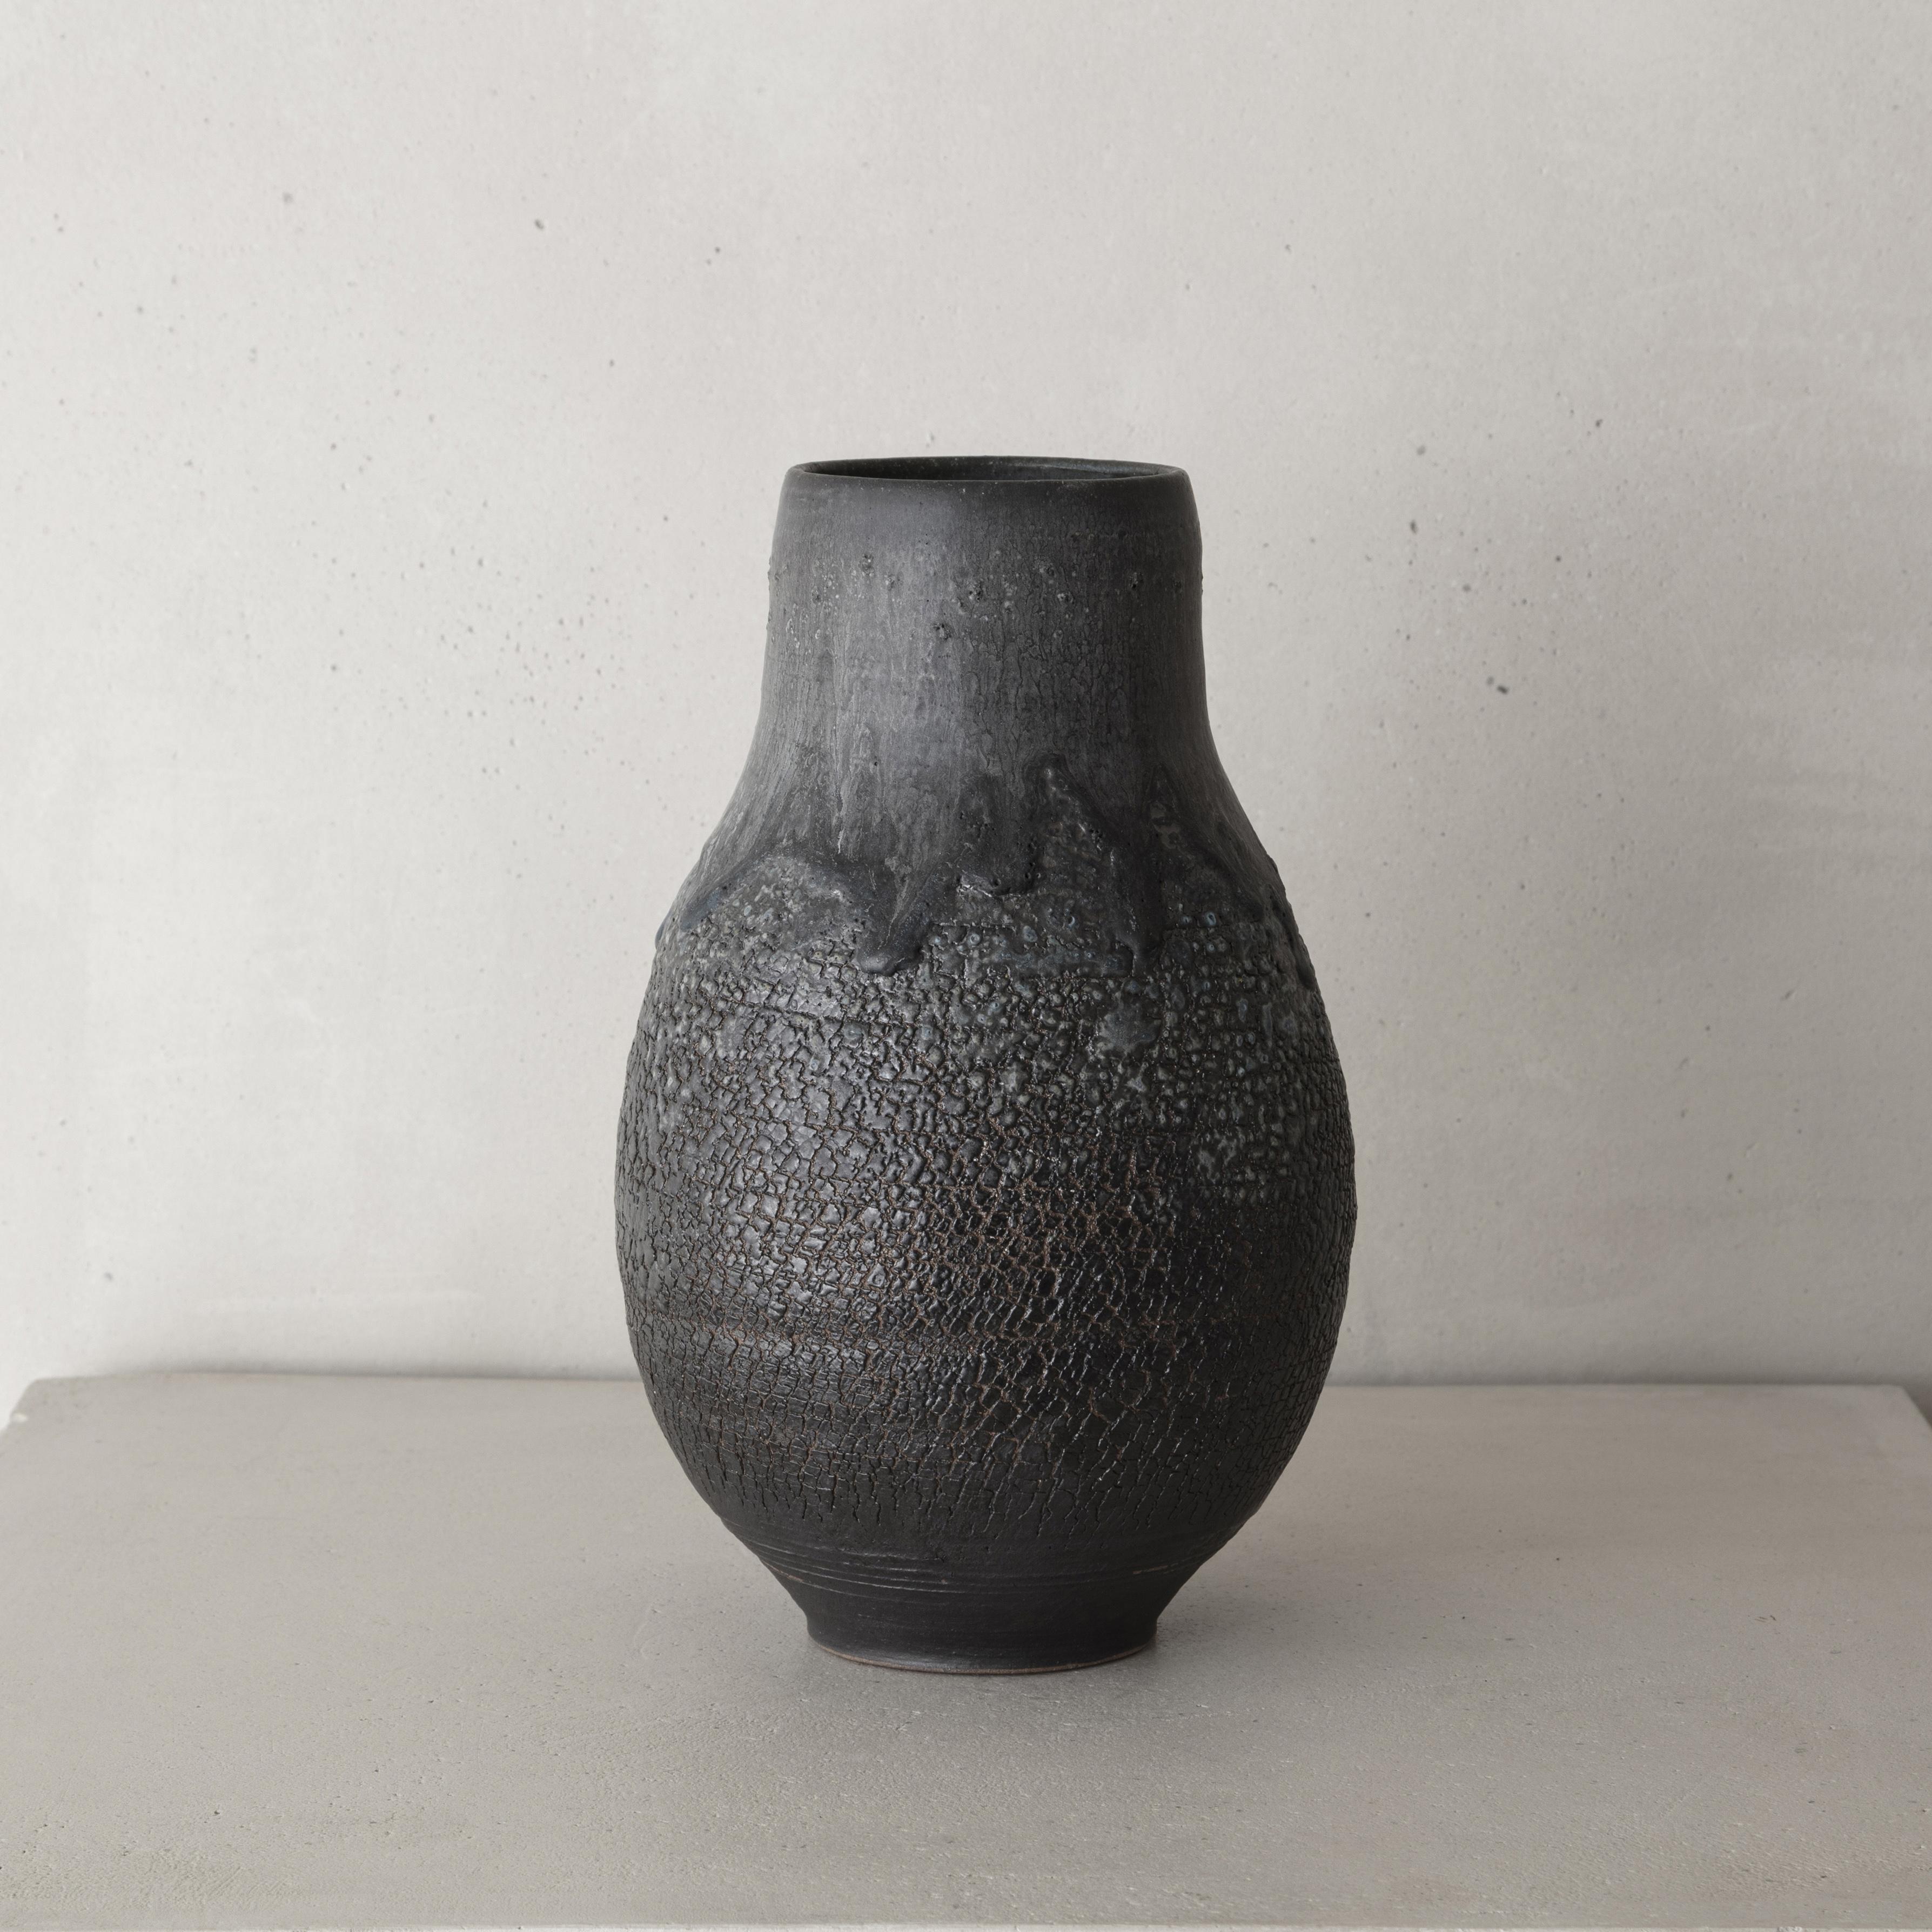 Speliopoulos’ passion for craftsmanship, organic textures and forms has informed his work throughout his creative career. This collection features highly textured vessels, reflecting the artist’s interest in the malleability and tactile expressions